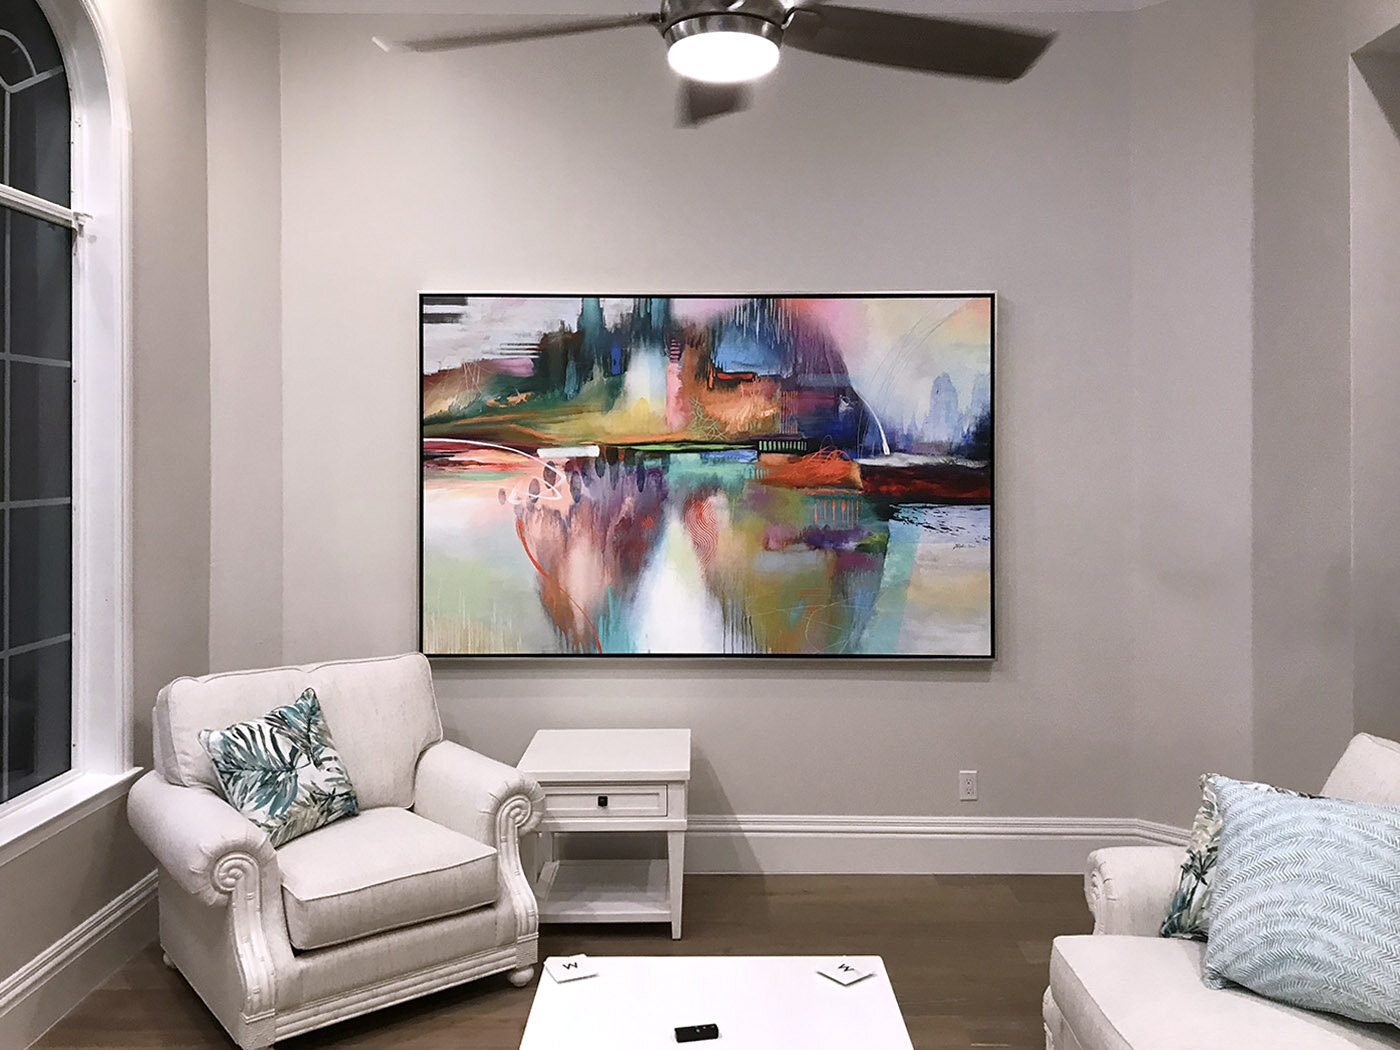 Large abstract artwork naples fl, large abstract paintings, Large abstract prints southwest fl, artist Tim Parker Art Naples FL 4394.JPG